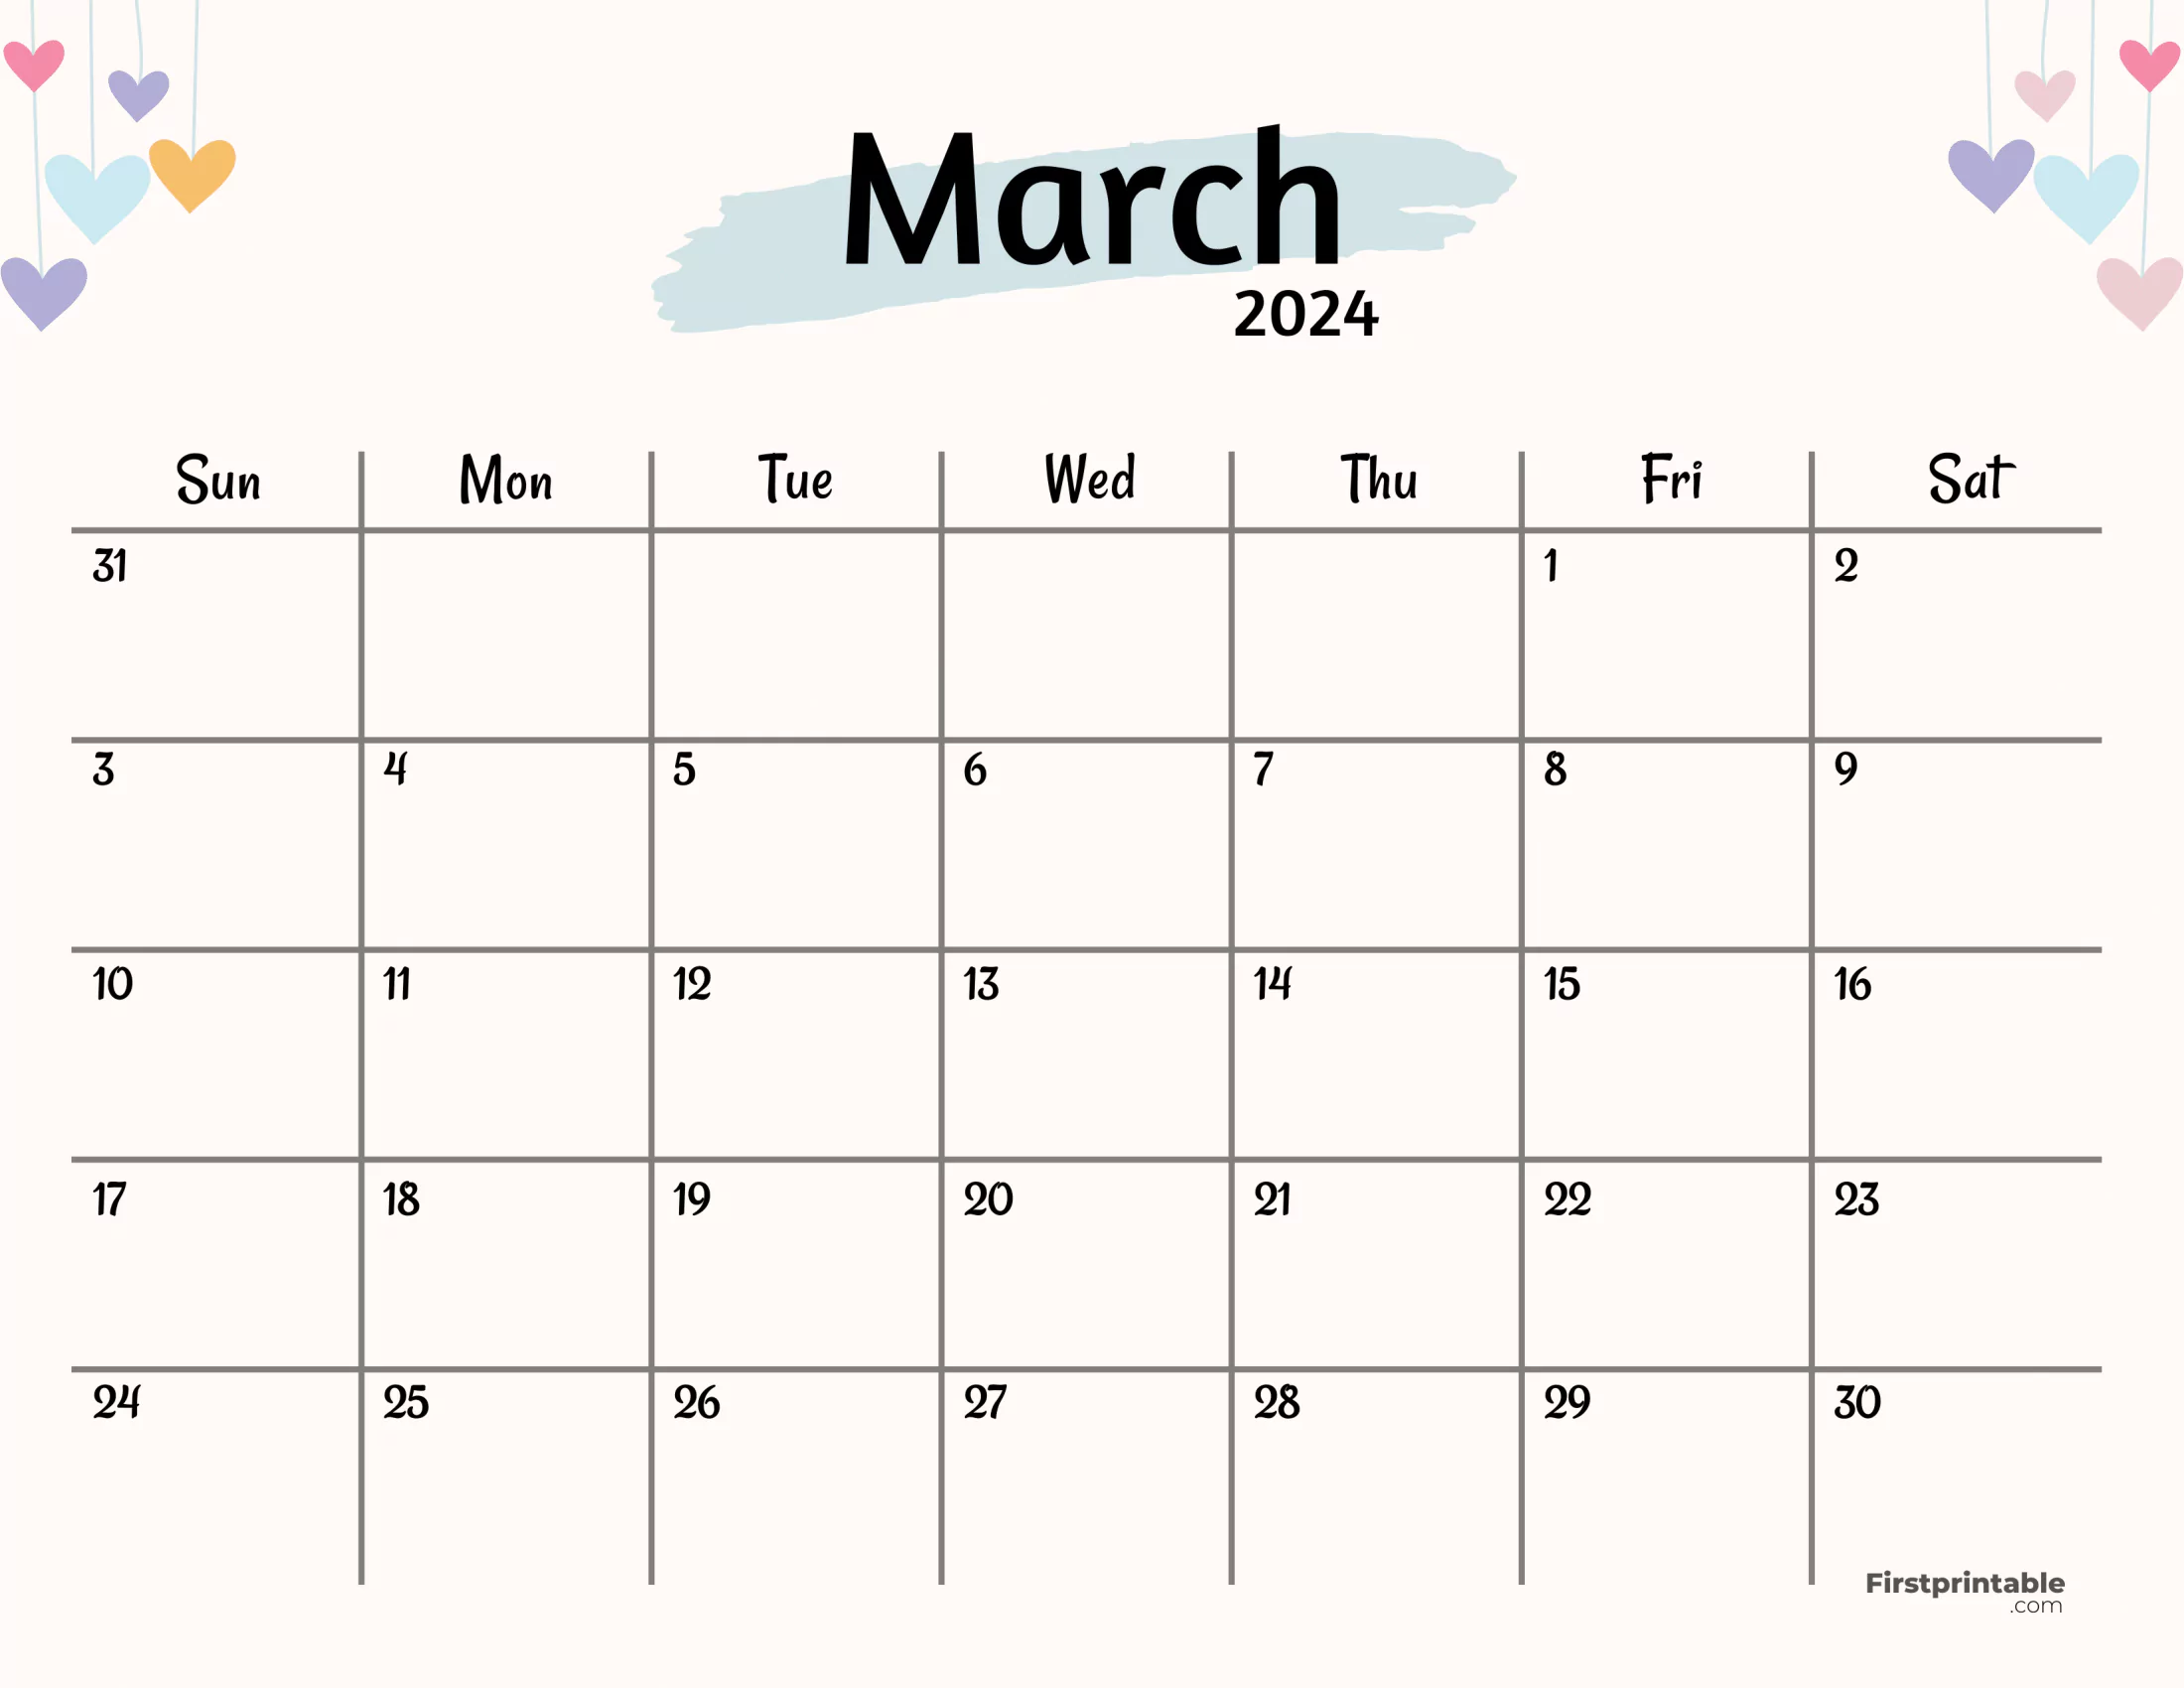 March Calendar 2024 template - Printable and Fillable